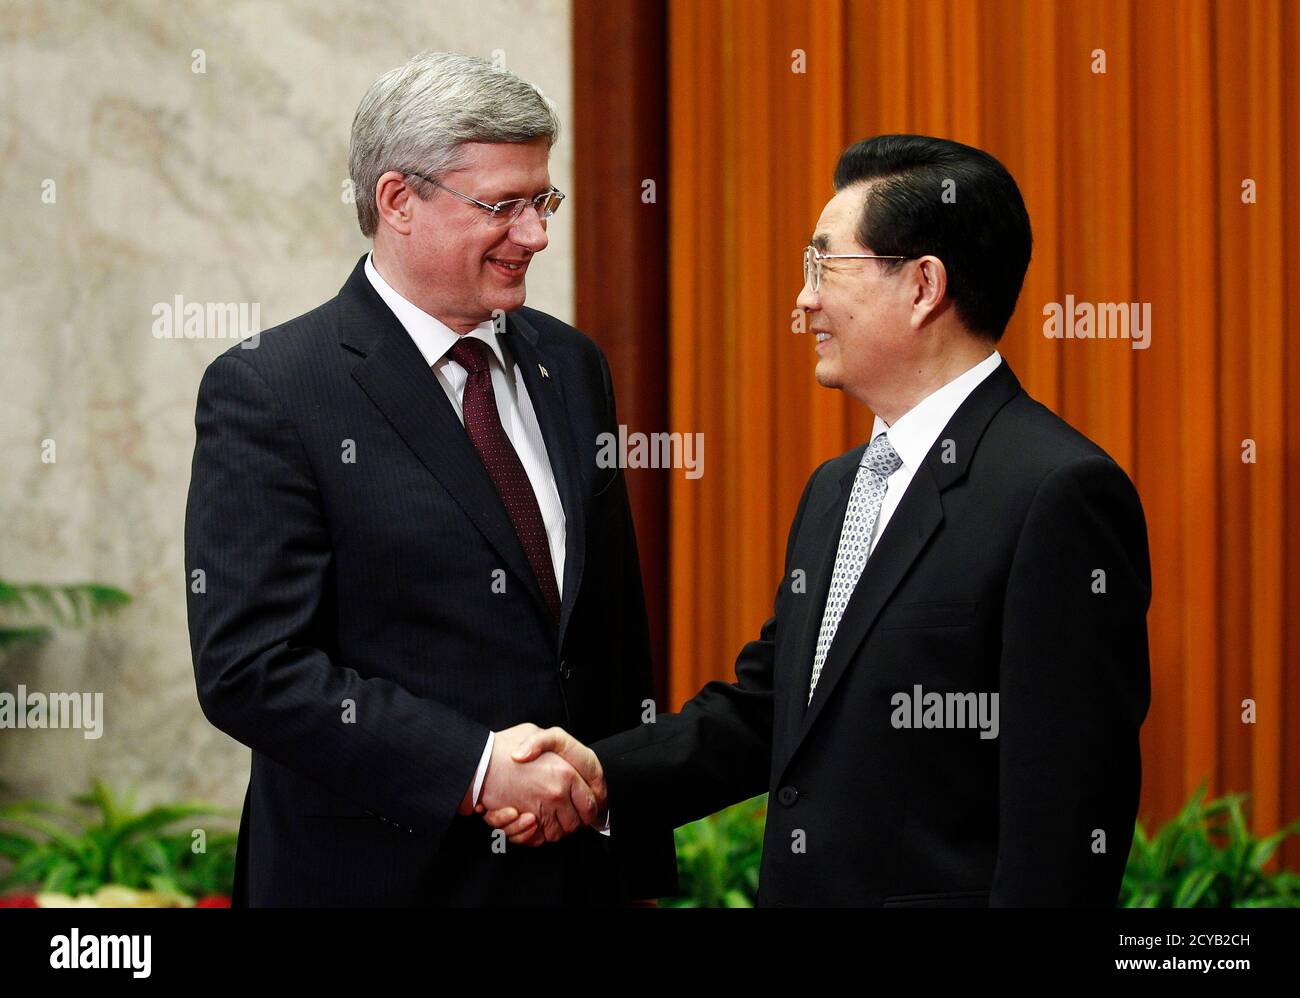 Canada's Prime Minister Stephen Harper (L) shakes hands with China's President Hu Jintao at the Great Hall of the People in Beijing February 9, 2012. China and Canada on Wednesday signed a series of deals to boost modest levels of bilateral trade and finished negotiations on a foreign investment protection pact after 18 years of talks.      REUTERS/Chris Wattie       (CHINA - Tags: POLITICS) Stock Photo